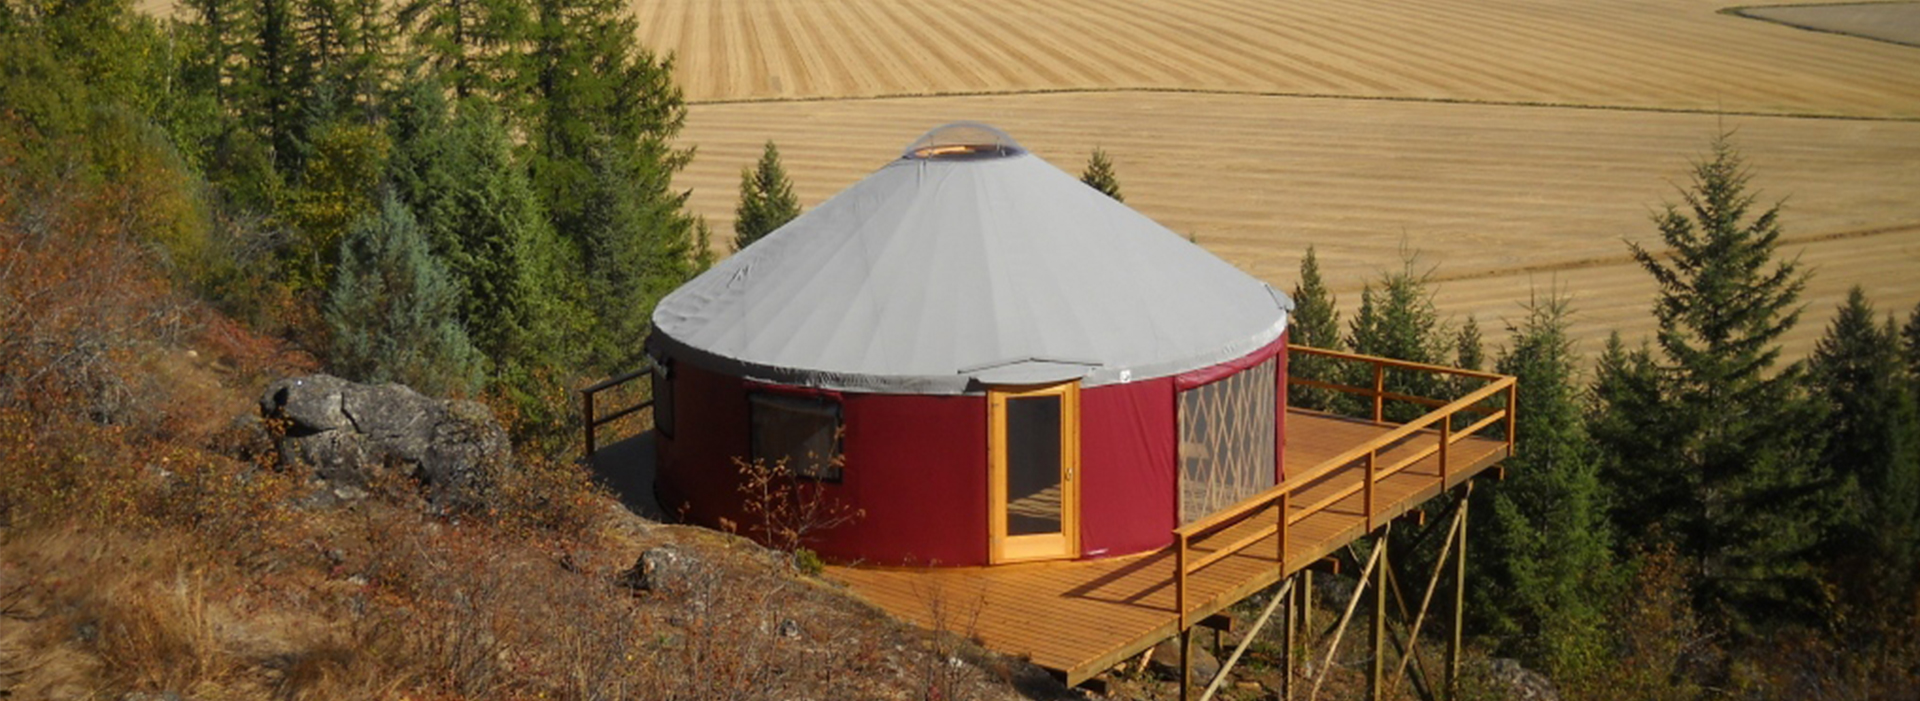 10-reasons-a-yurt-house-might-not-be-rig